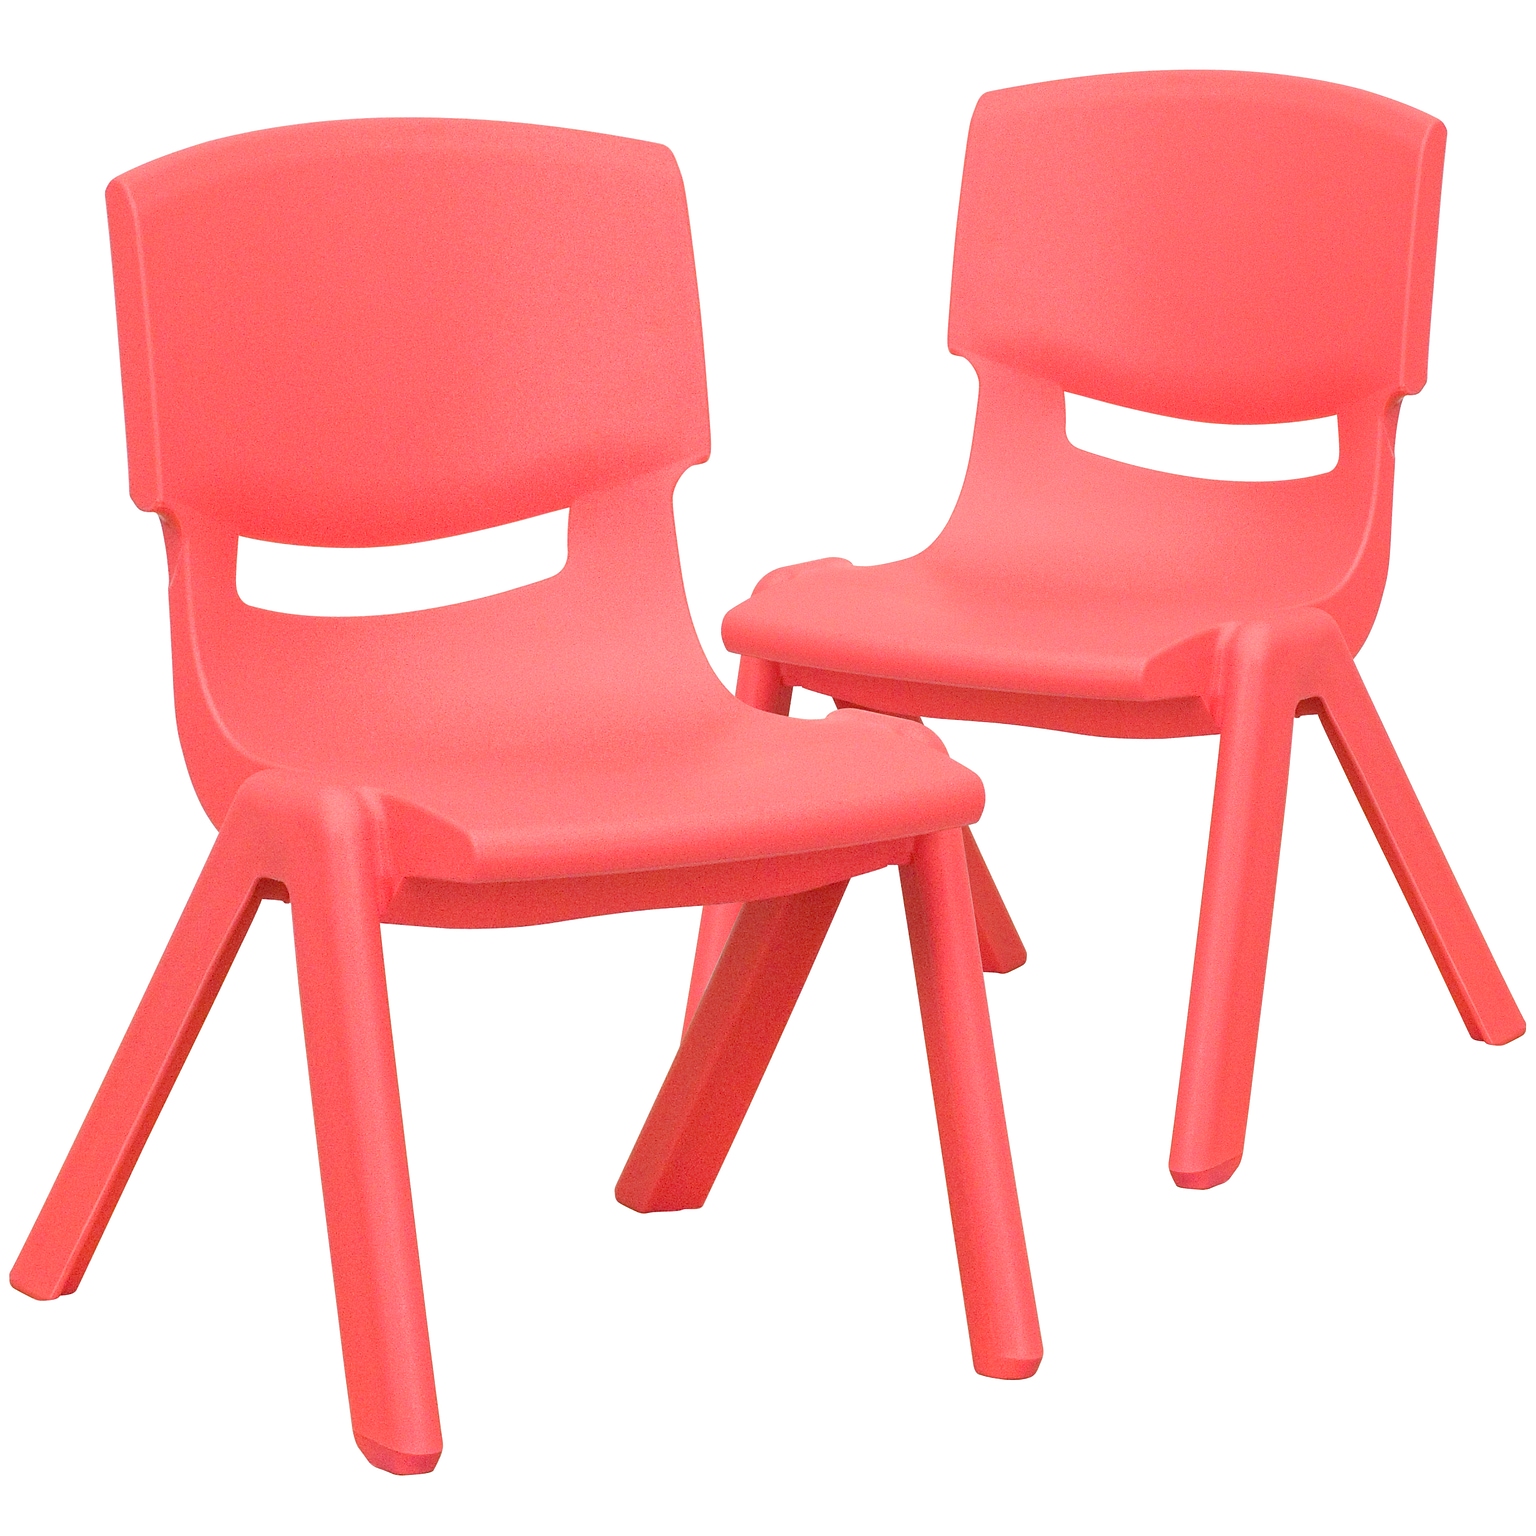 Flash Furniture Plastic School Chair with 10.5 Seat Height, Red, 2-Pieces (2YUYCX003RED)